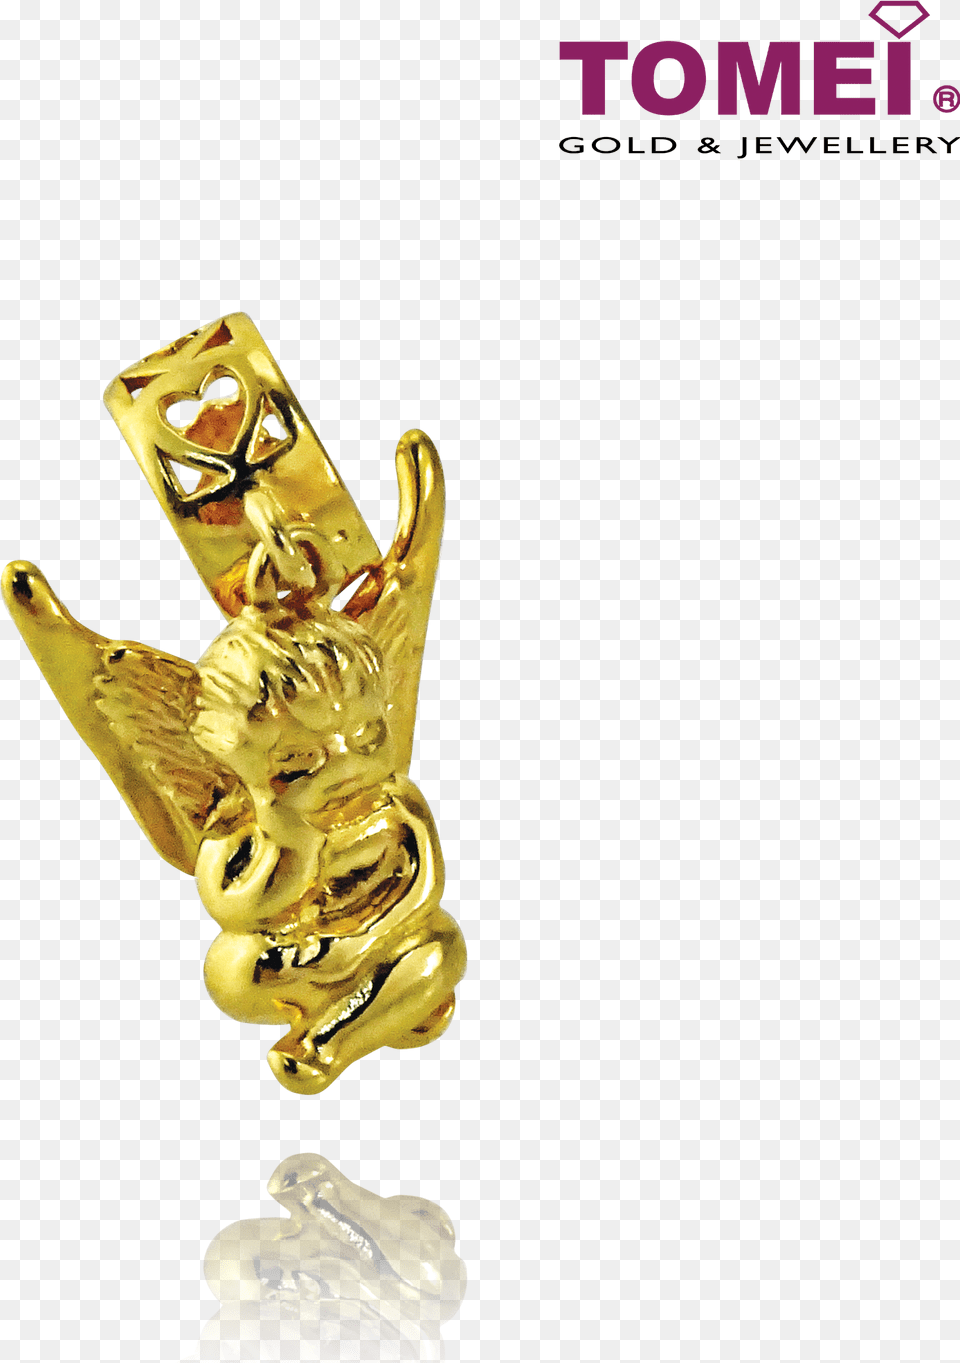 Cupid With Angel Wings Charm Colors Of Memories Tomei Yellow Gold 916 22k Tm Yg0620p1c Tomei Jewellery, Treasure, Accessories Png Image